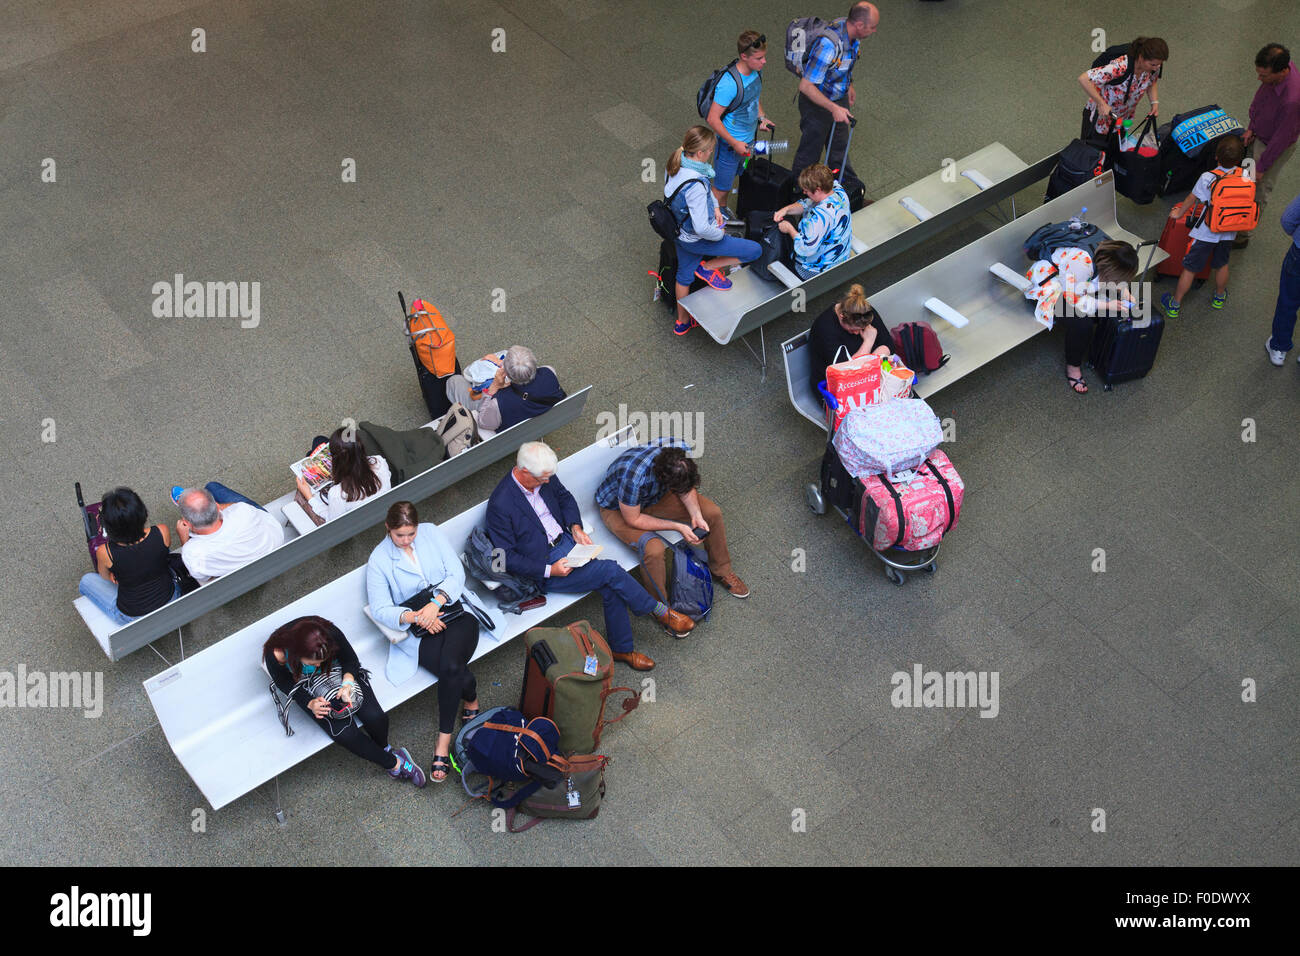 Looking down on passengers and travelers sitting on benches waiting at St Pancras Stock Photo